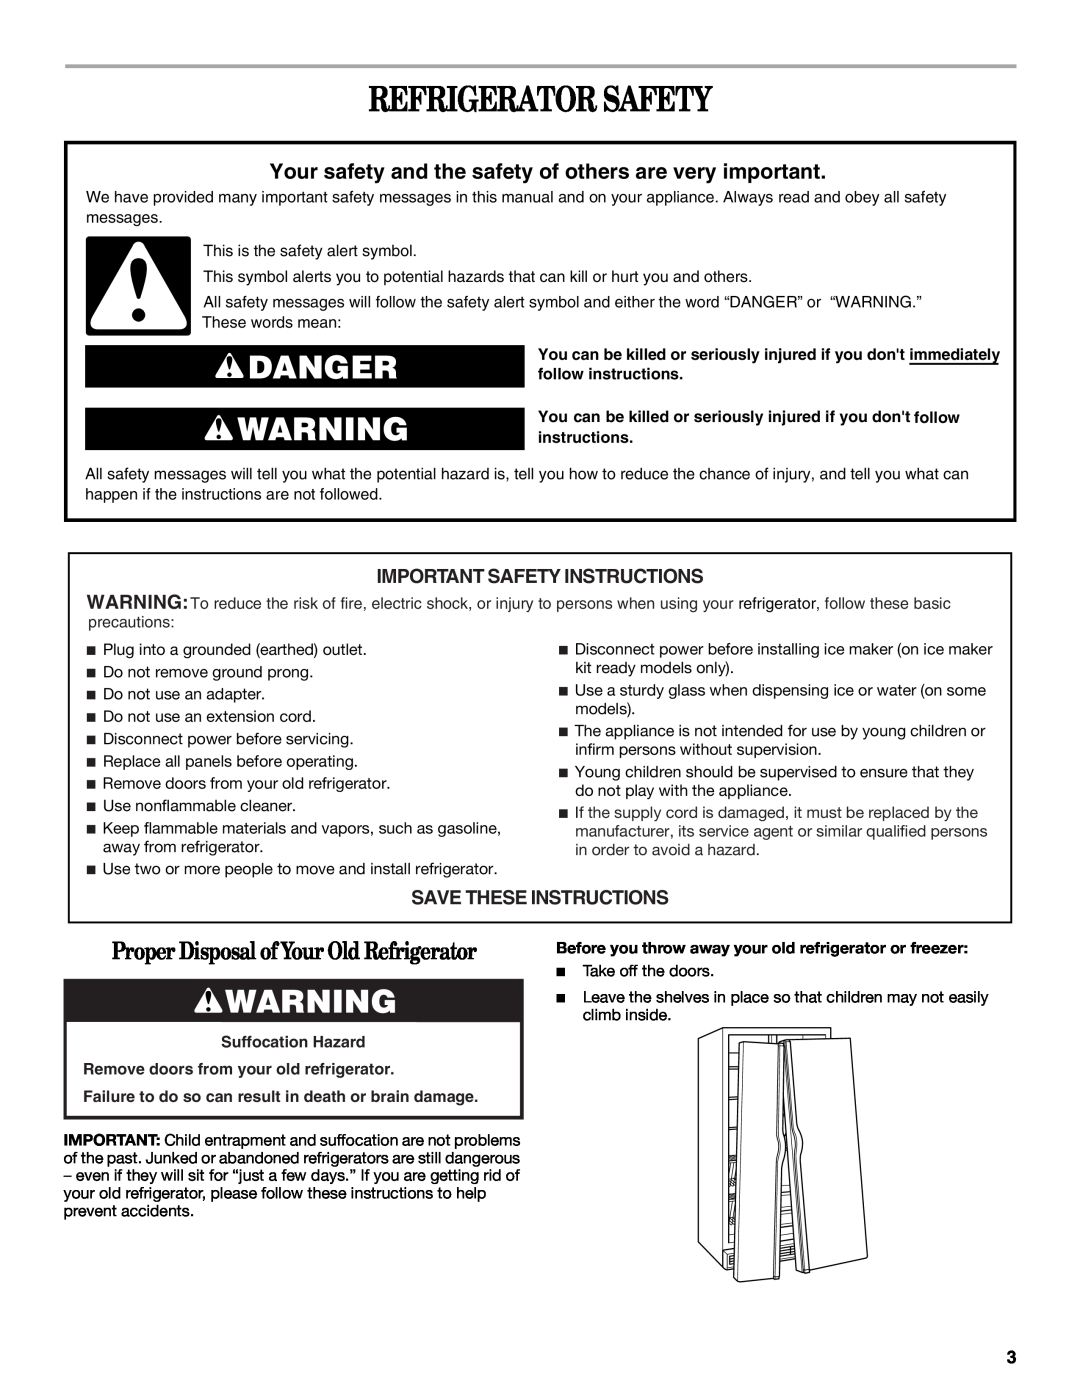 Whirlpool 2308045 Refrigerator Safety, Danger, Proper Disposal ofYour Old Refrigerator, Important Safety Instructions 